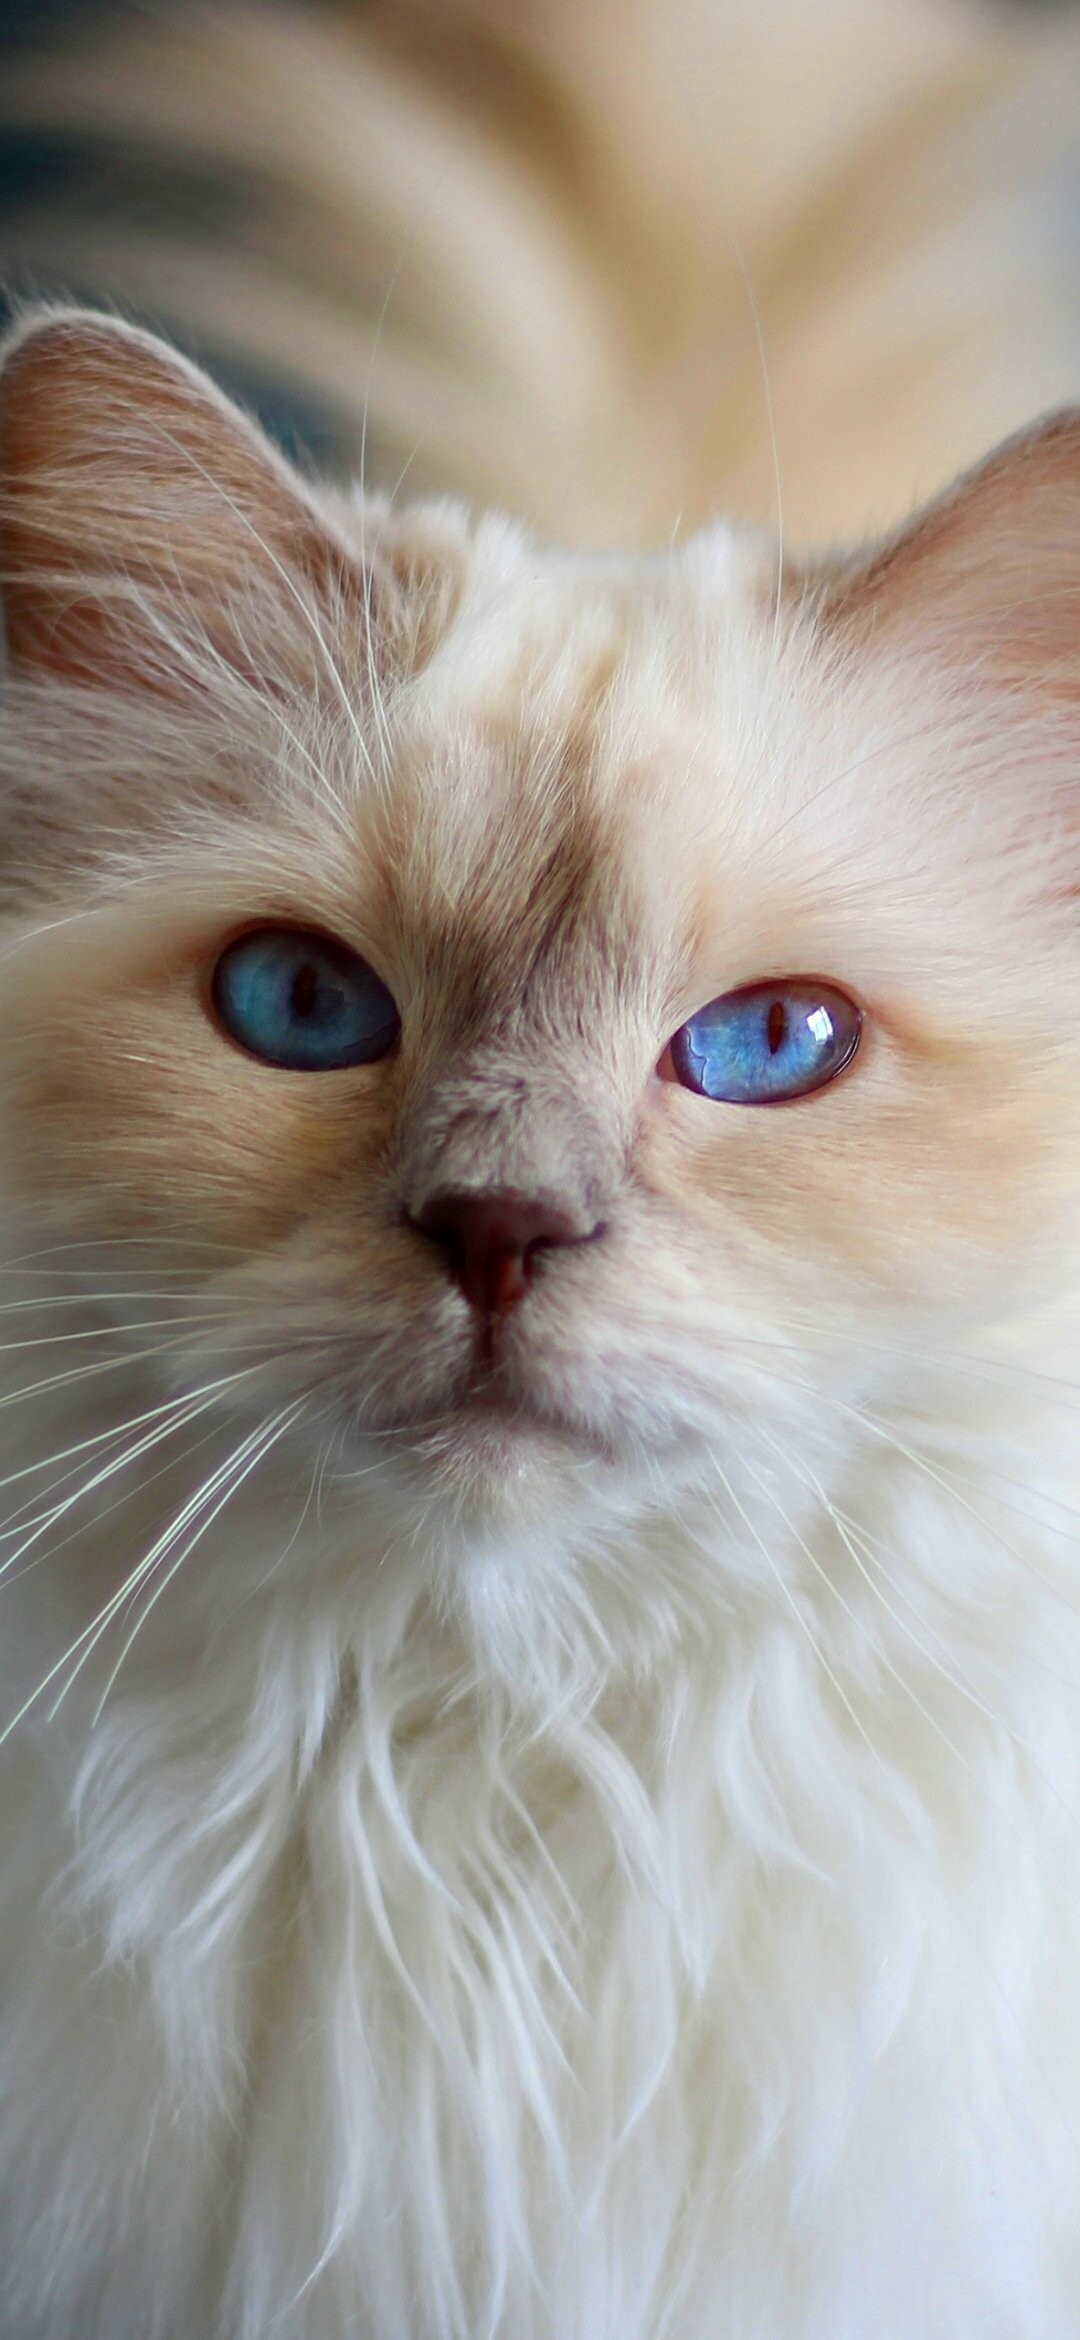 Ragdoll: Docile, mild-mannered, and congenial, Ragdolls make ideal indoor companions. 1080x2340 HD Wallpaper.